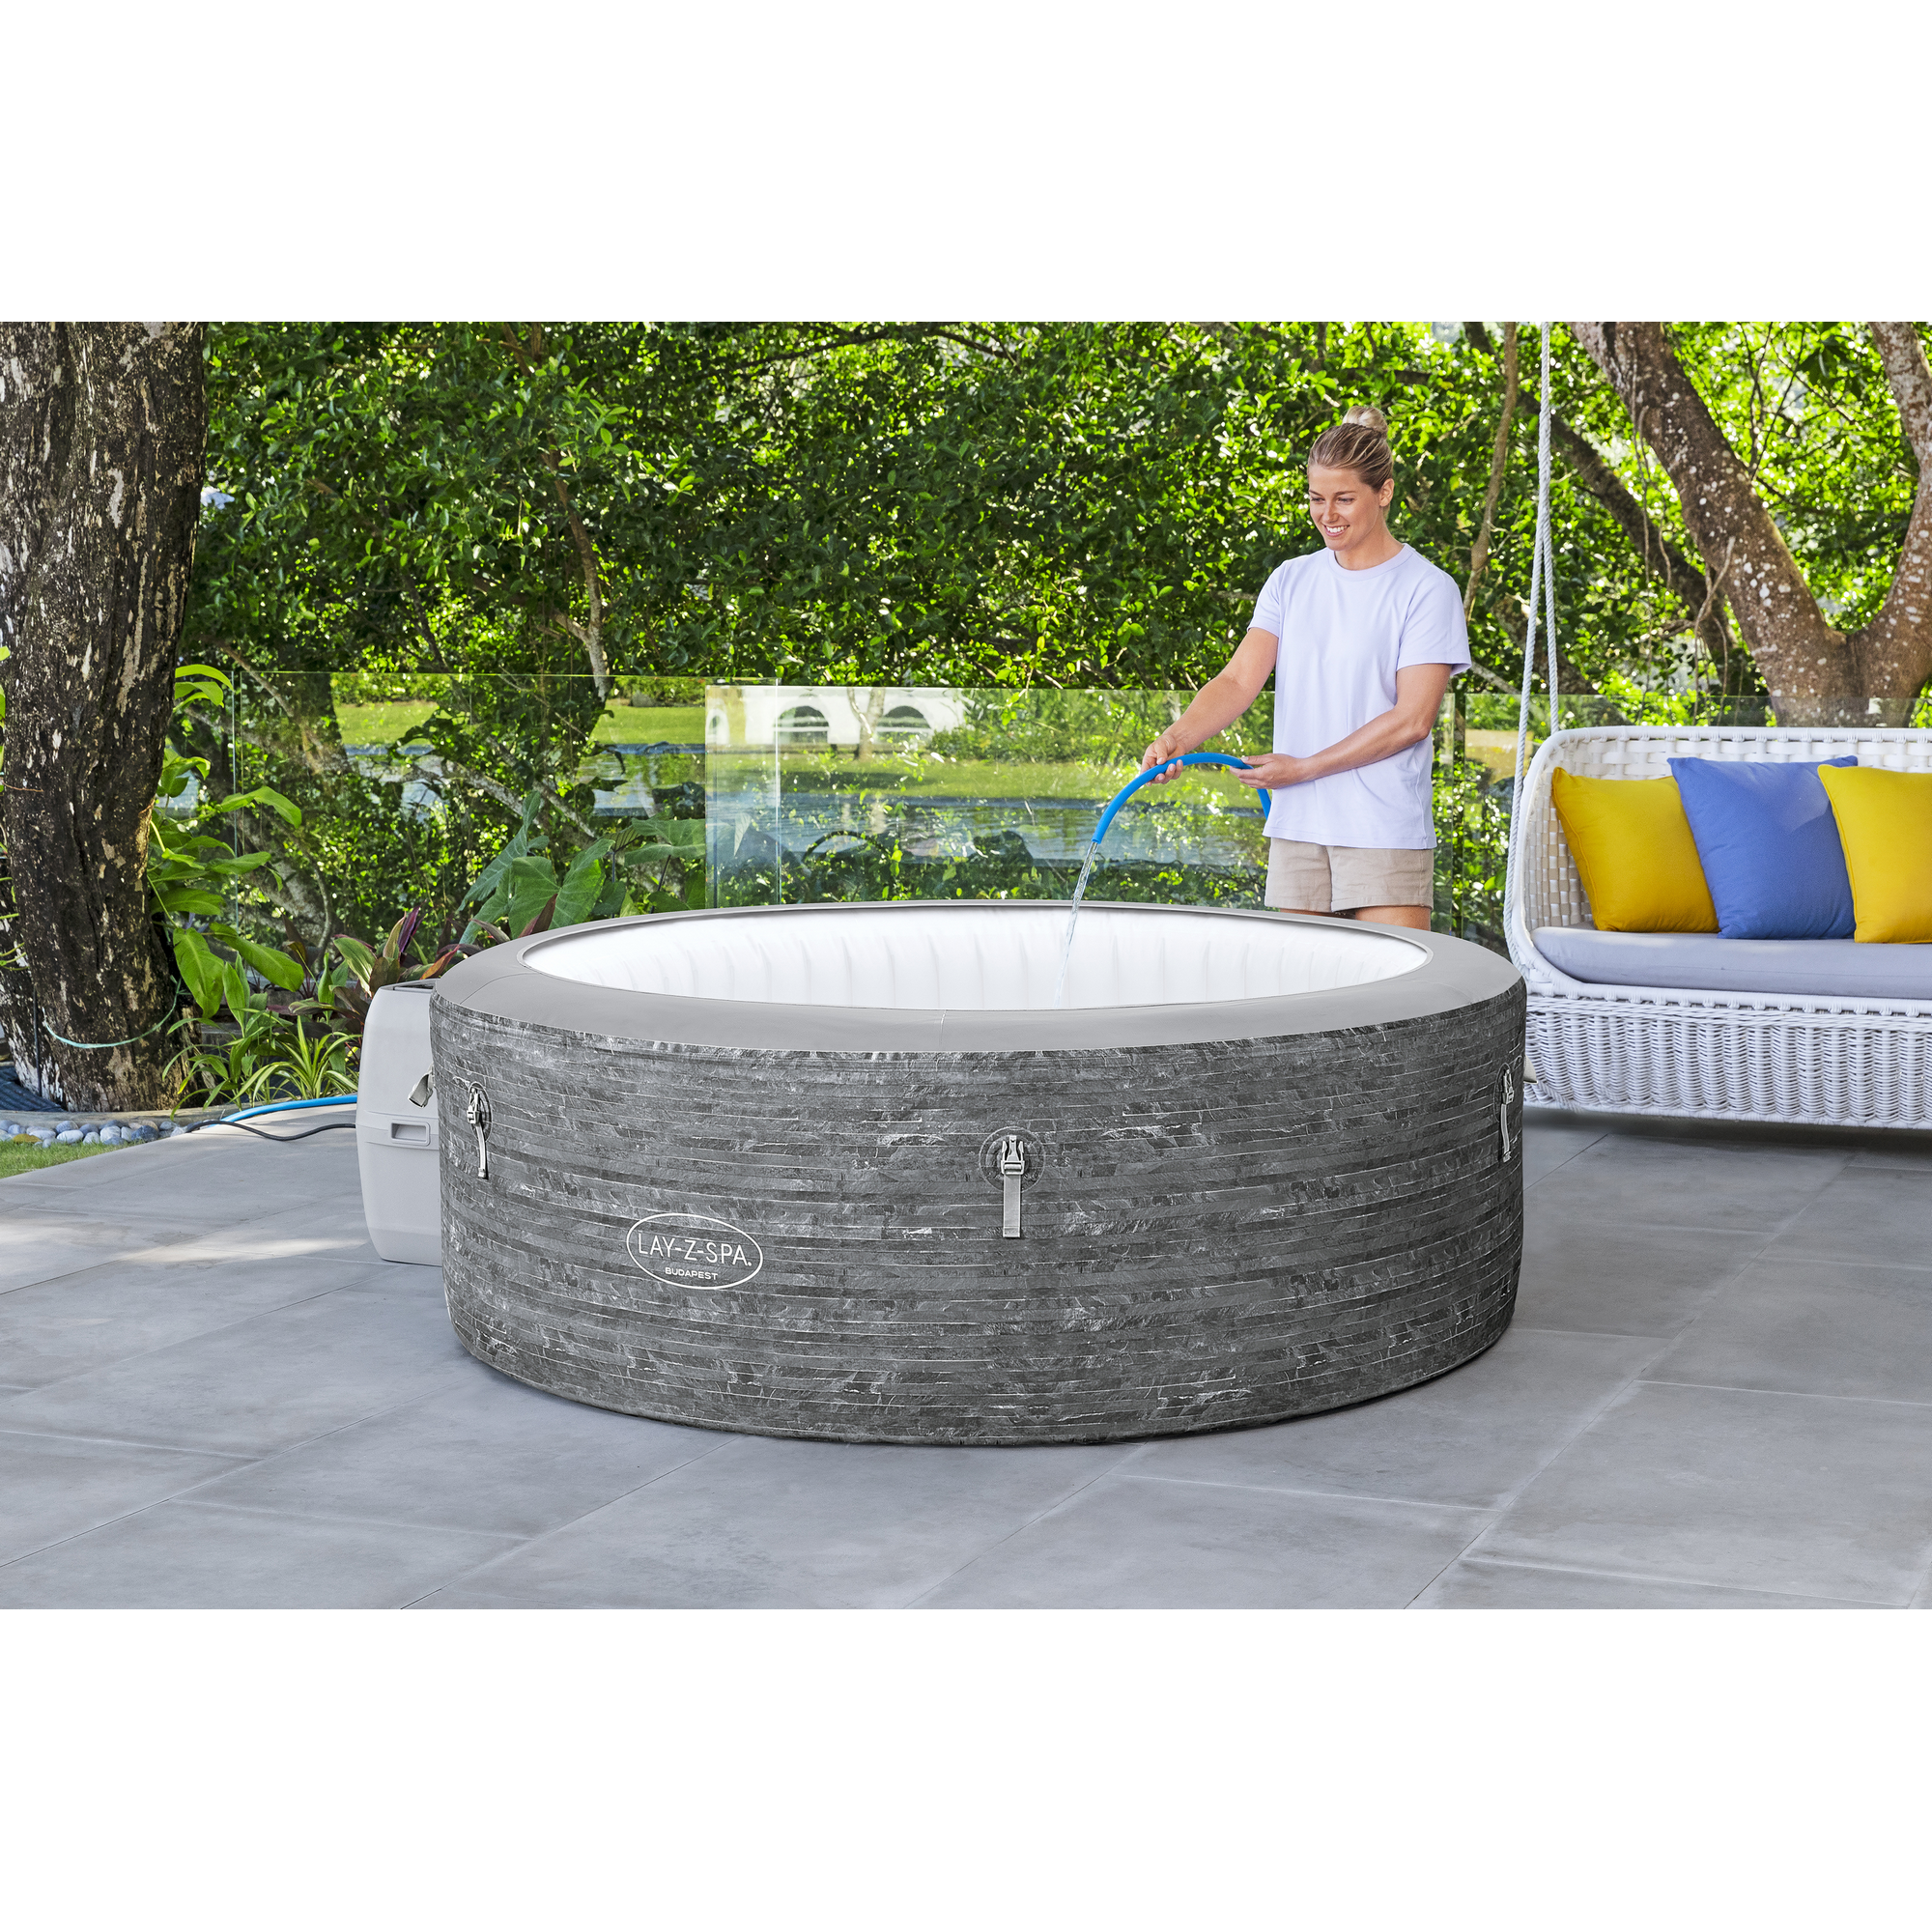 WLAN-Whirlpool 'LAY-Z-SPA ECO Budapest AirJet' Ø 196 x 66 cm grau + product picture